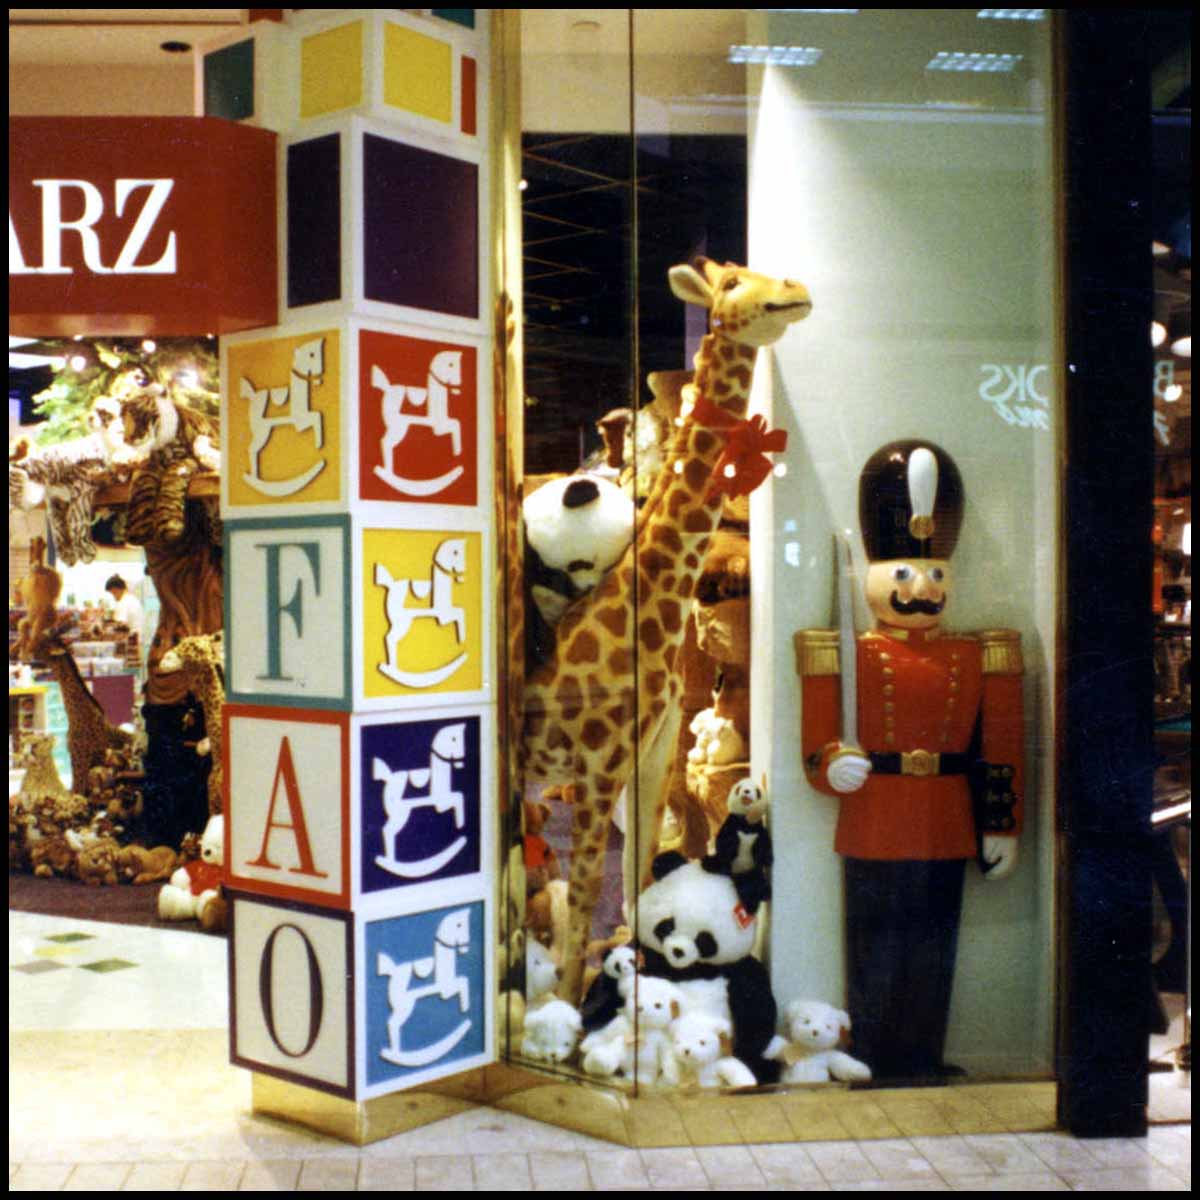 photo of FAO Schwarz toy store front window with logo tower of blocks, stuffed animals, and polychromed toy soldier sculpture